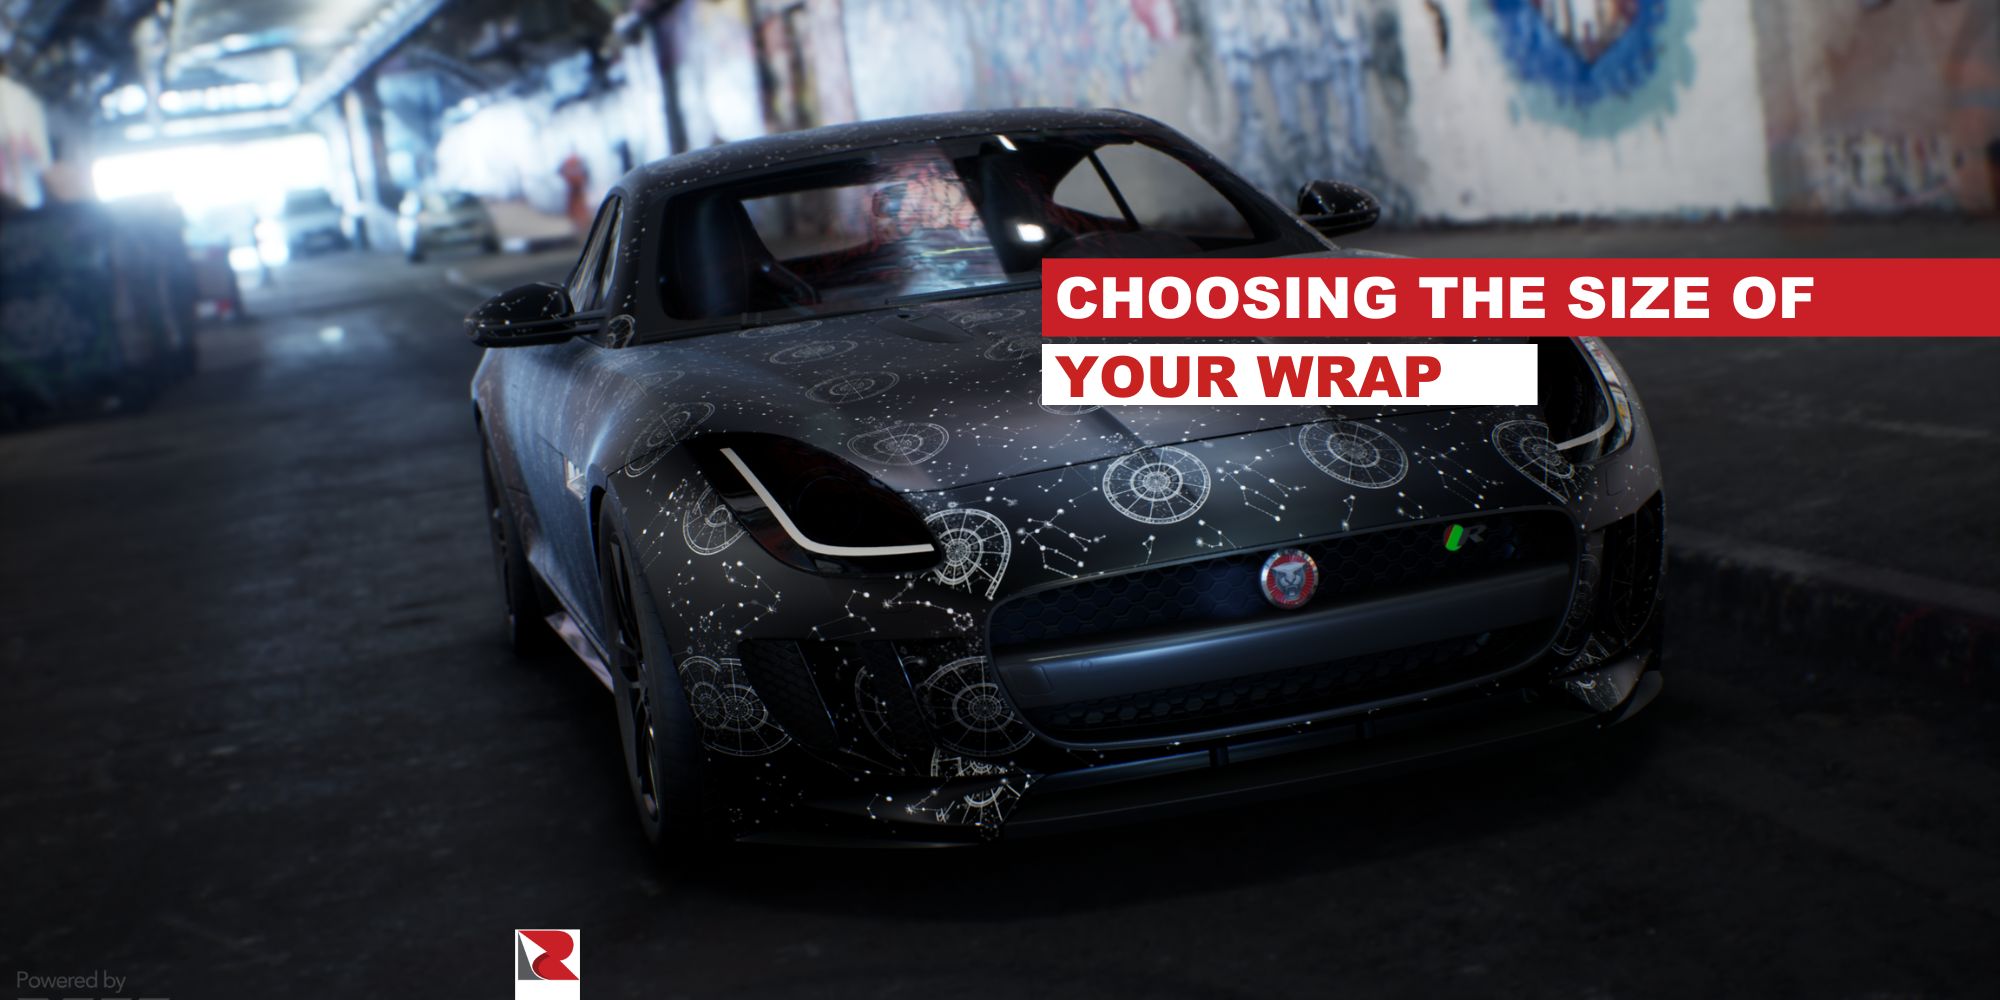 Choosing the Right Size Wrap for Your Vehicle